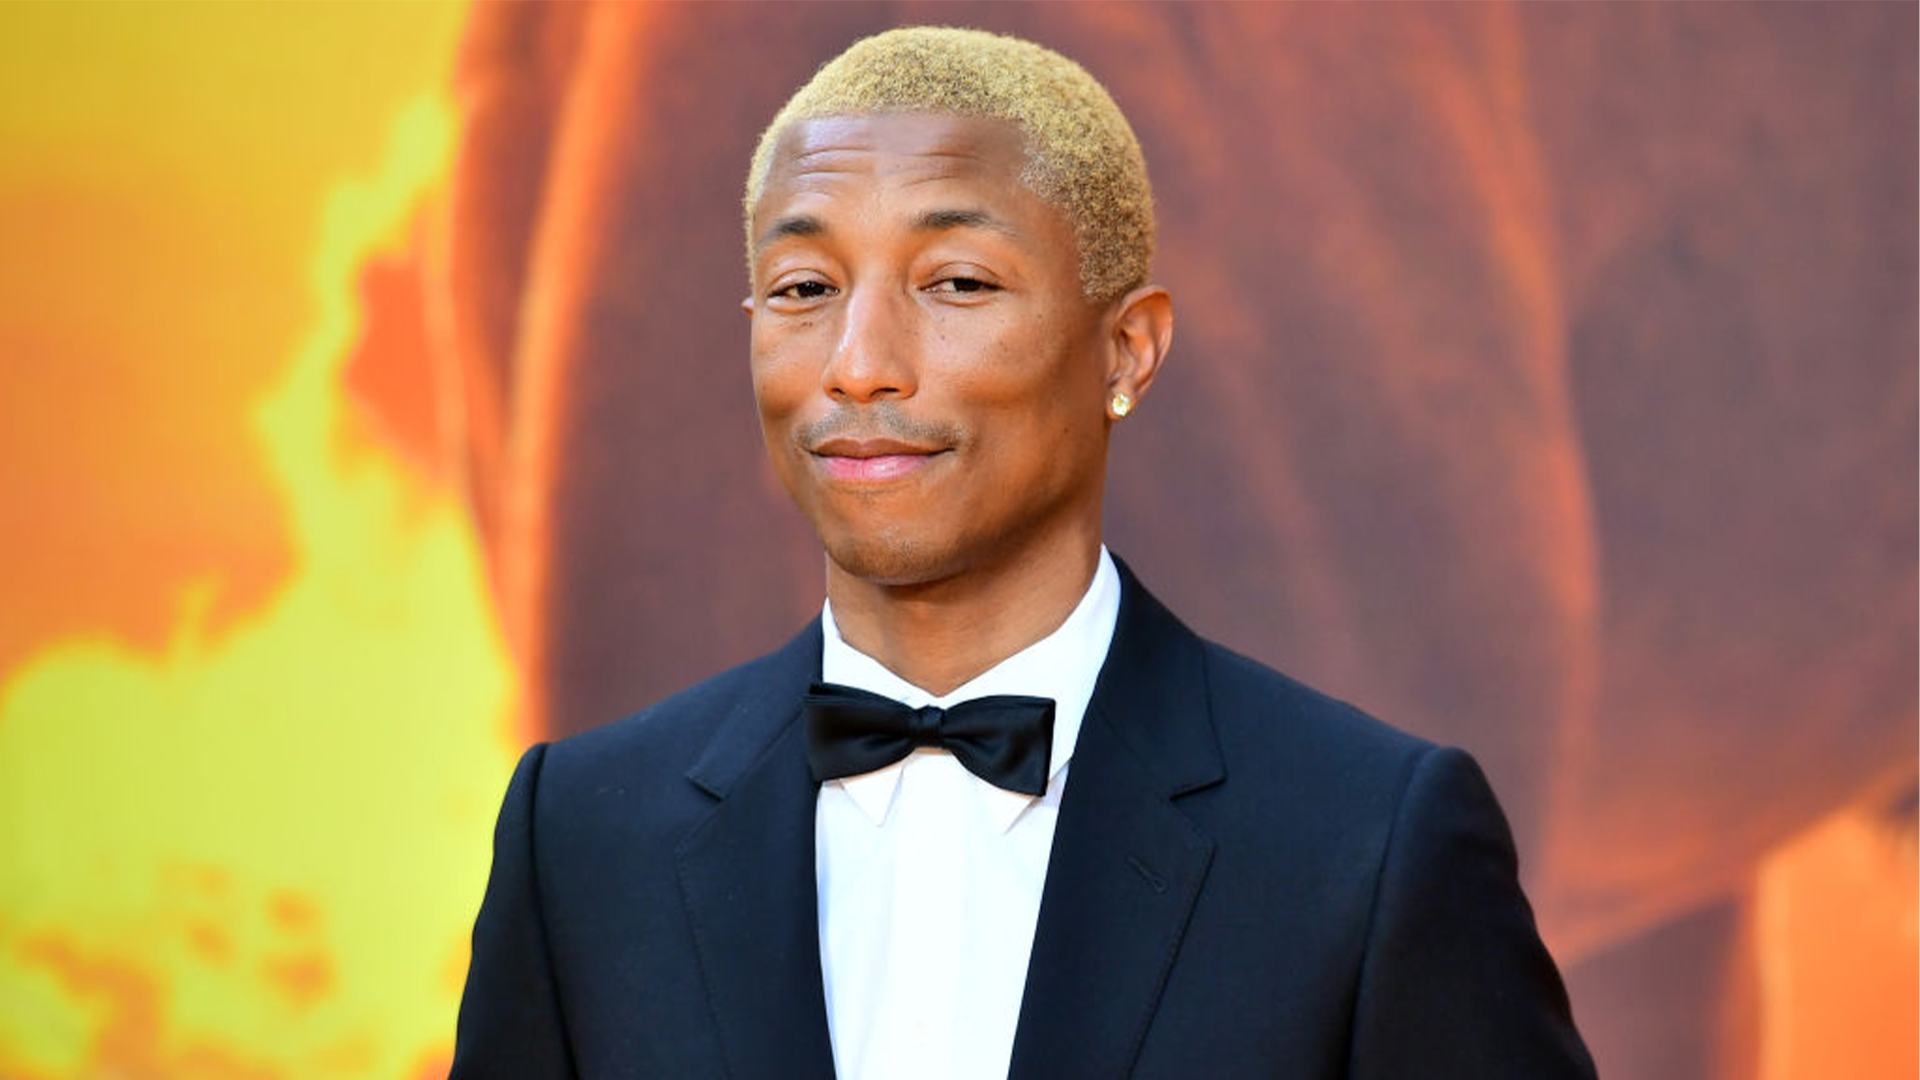 Pharrell's YELLOW Teams Up With Cisco For New Tuition-Free School To Provide Access To Technology